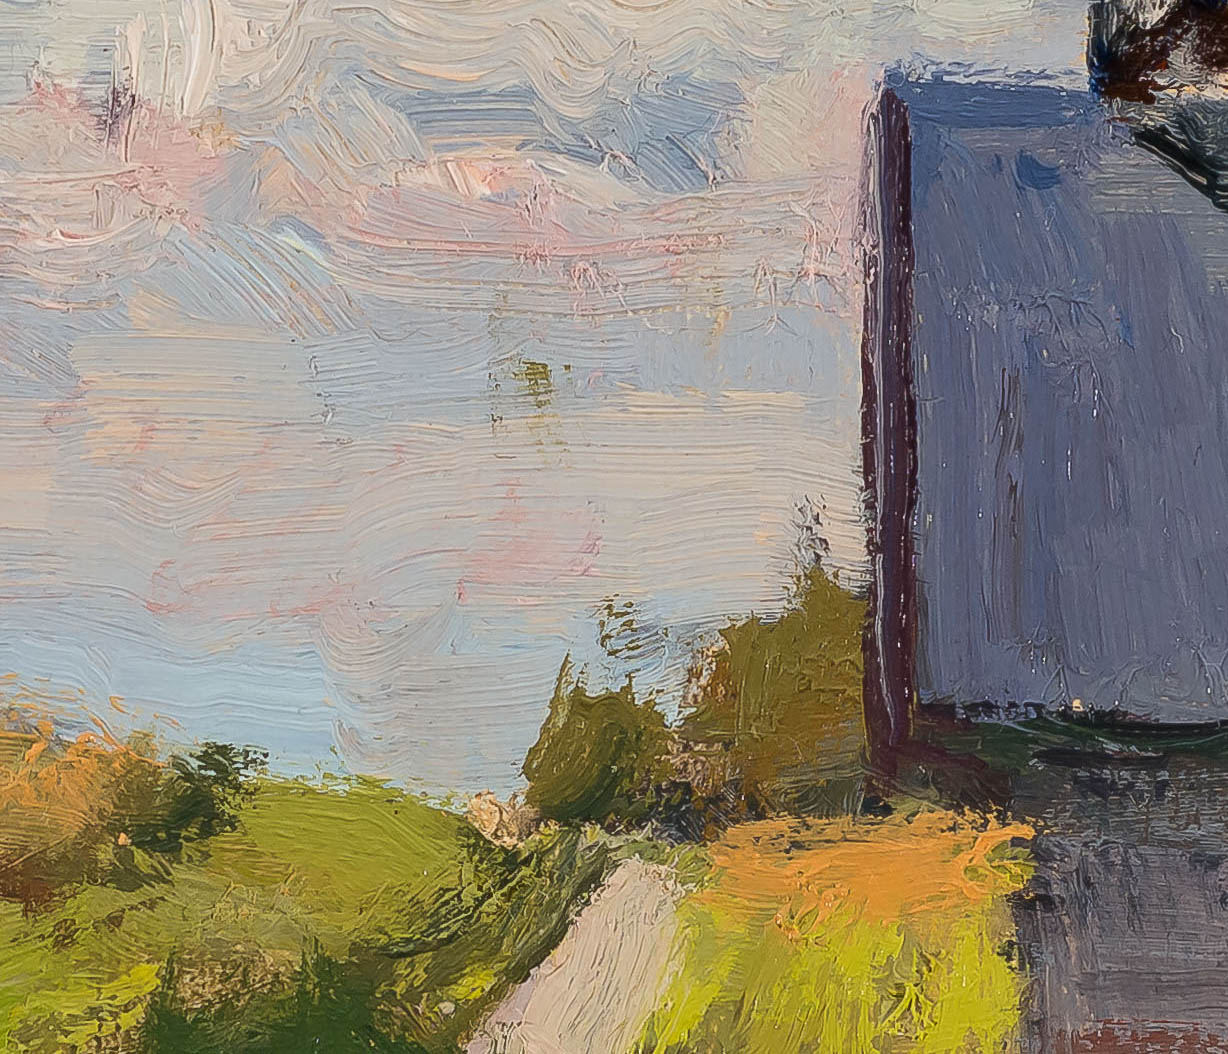 Schoolhouse-in-Shadow-8x12 - painting by Joe Paquet photographed by Mitch Rossow -detail